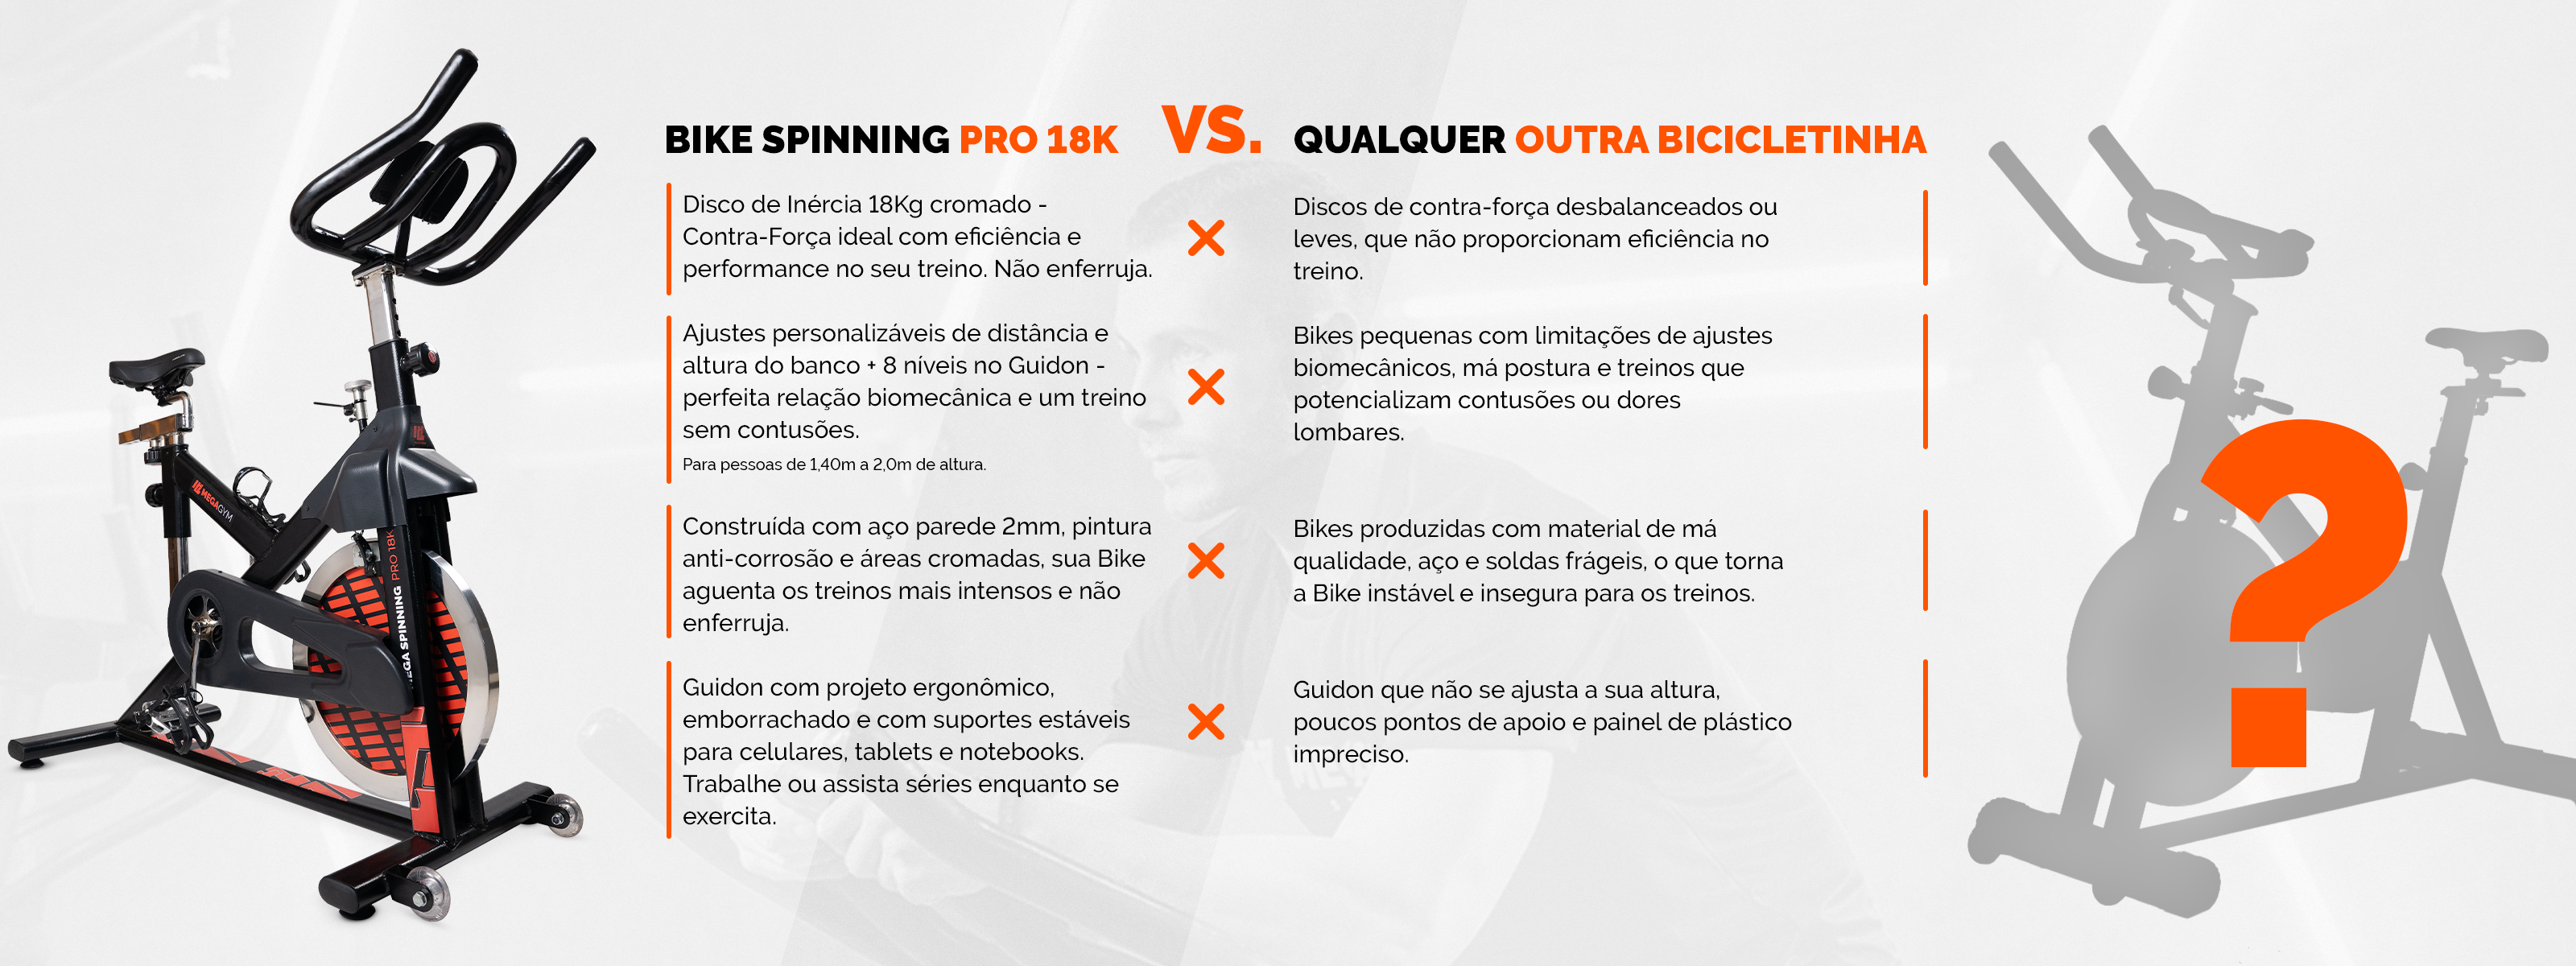 Banner comparativo - Bike Spinning pro 18k x Qualquer outra bicicletinha - Desktop.png__PID:eee184b2-6cd8-45f7-8362-11e1436f34f4